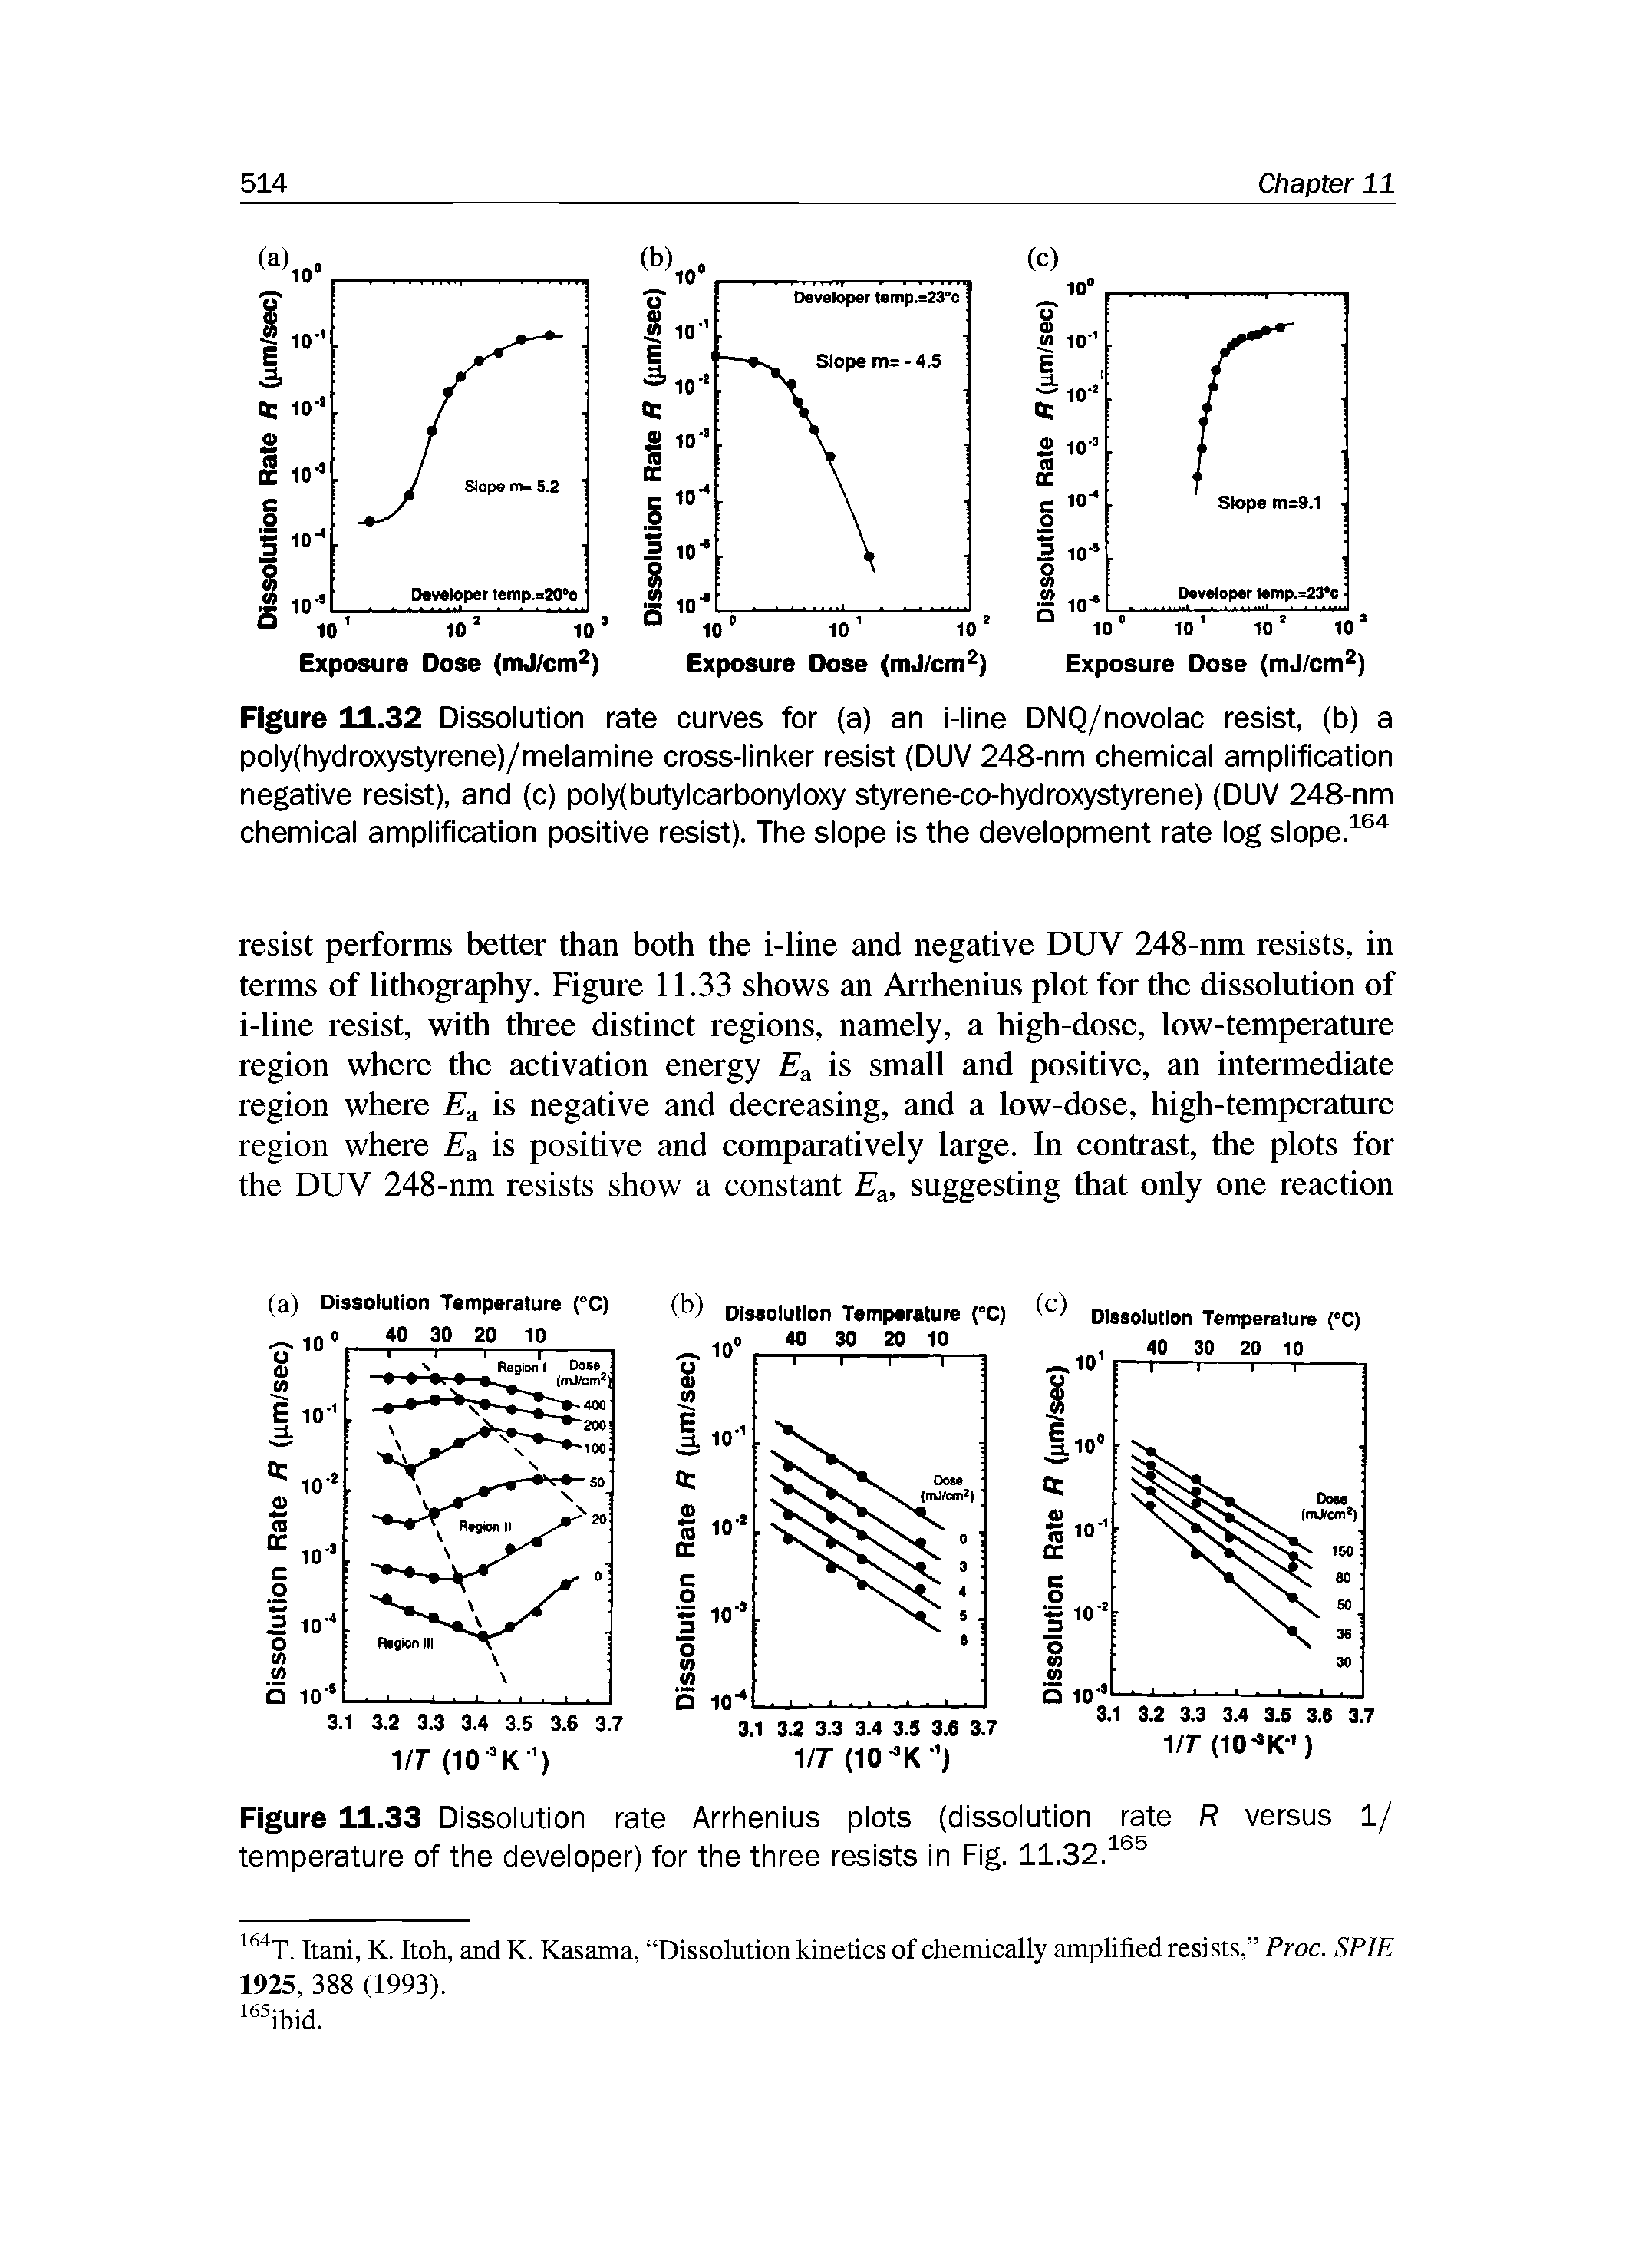 Figure 11.32 Dissolution rate curves for (a) an i-line DNQ/novolac resist, (b) a poly(hydroxystyrene)/melamine cross-linker resist (DUV 248-nm chemical amplification negative resist), and (c) poly(butylcarbonyloxy styrene-co-hydroxystyrene) (DUV 248-nm chemical amplification positive resist). The slope is the development rate log slope. ...